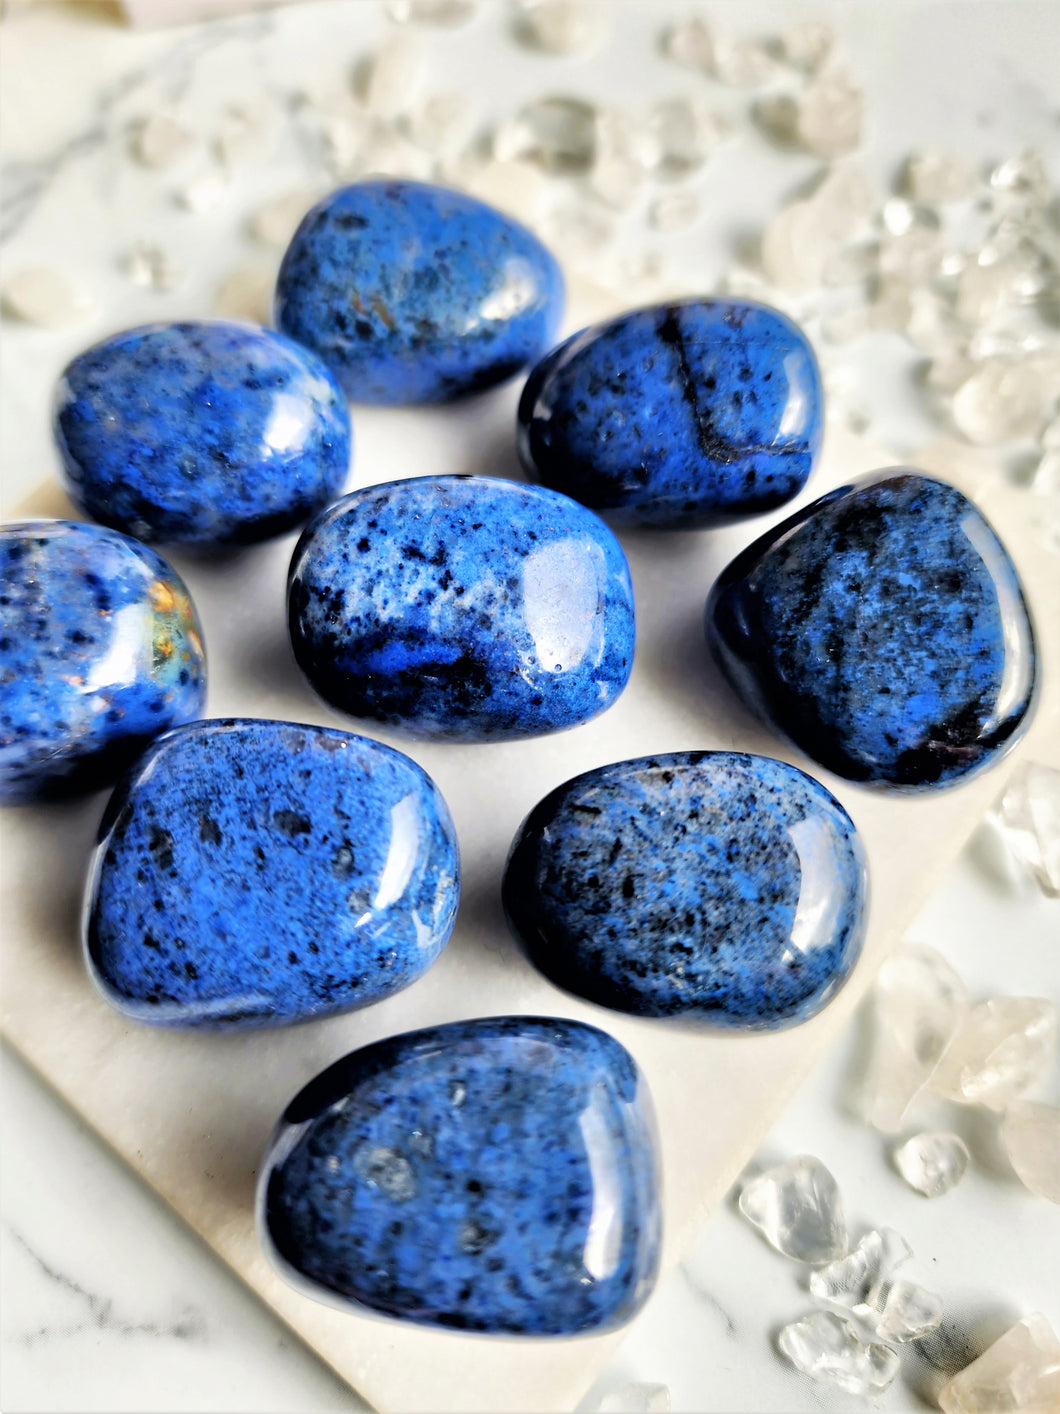 Dumortierite is believed to possess strong spiritual properties, promoting a sense of calmness and clarity within the mind. It is thought to aid in enhancing one's psychic abilities and opening channels of communication with higher realms